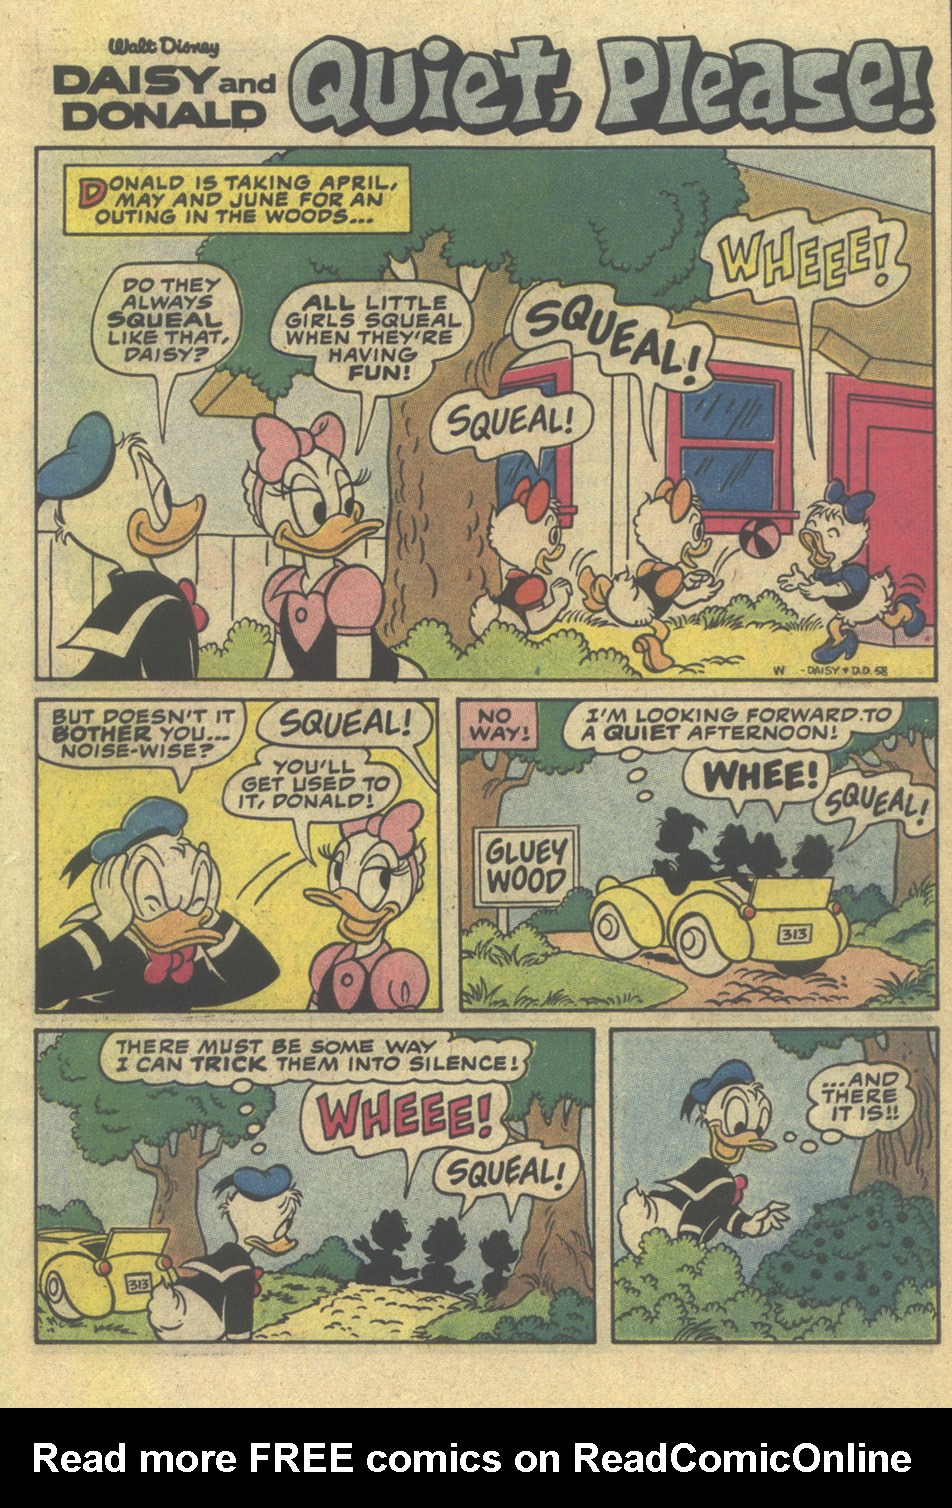 Read online Walt Disney Daisy and Donald comic -  Issue #58 - 31